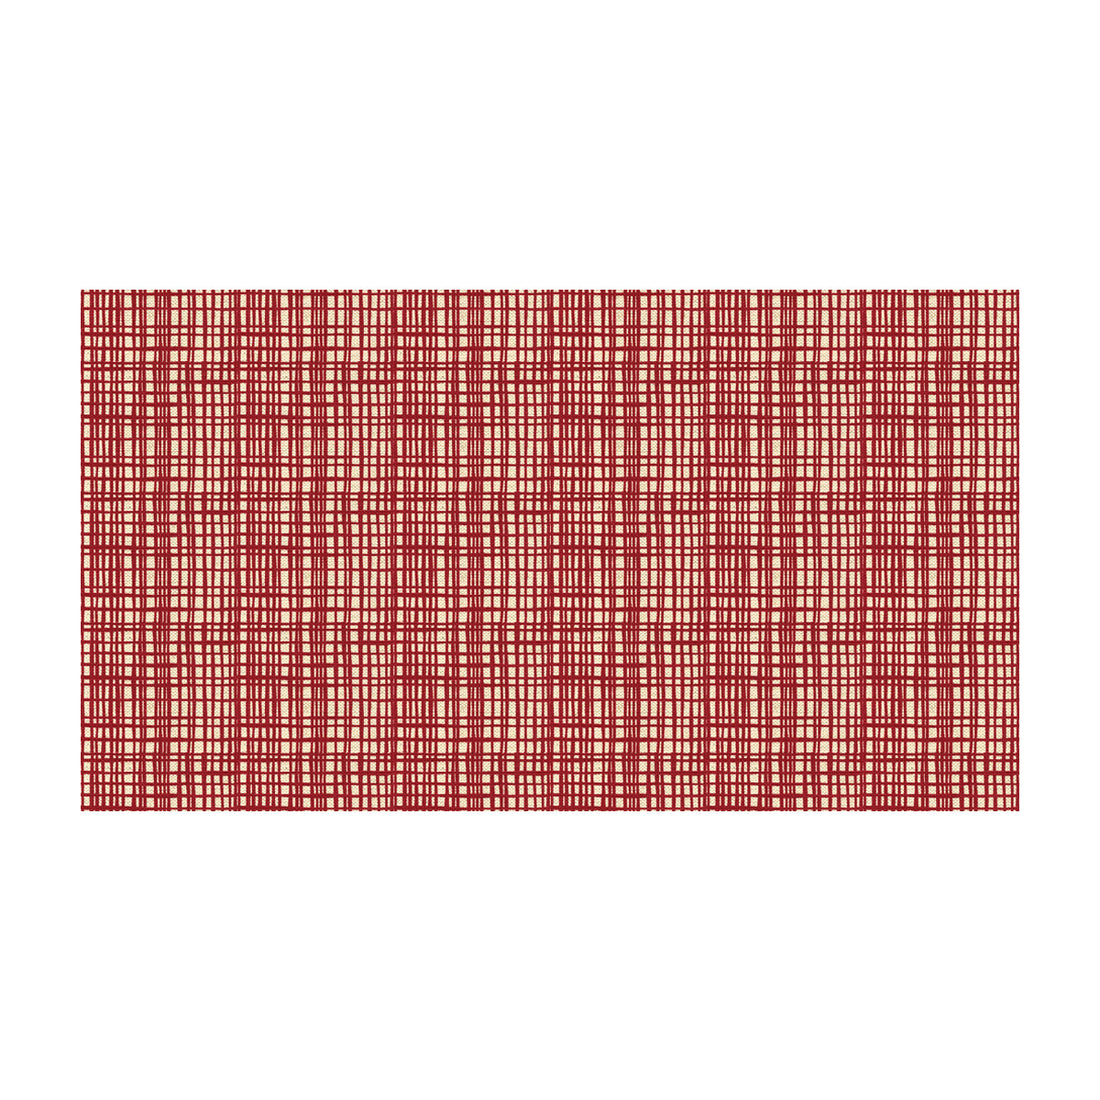 Openweave fabric in cherry color - pattern GWF-3409.19.0 - by Lee Jofa Modern in the Ashley Hicks Textures collection